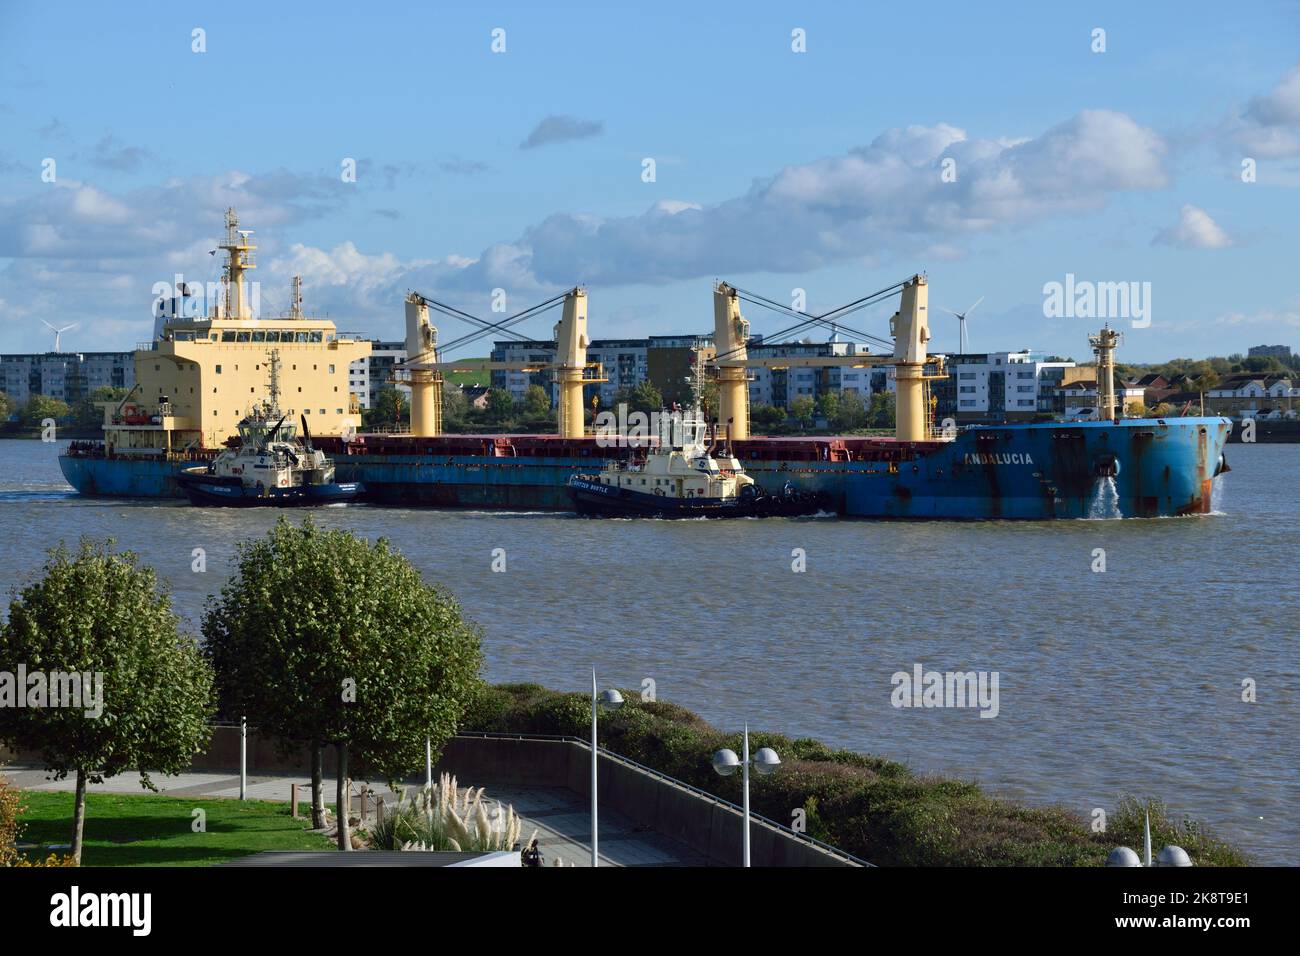 Bulk Carrier ANDALUCIA arrives from South Africa with another load of sugar for Tate & Lyle sugars at Silvertown, London Stock Photo